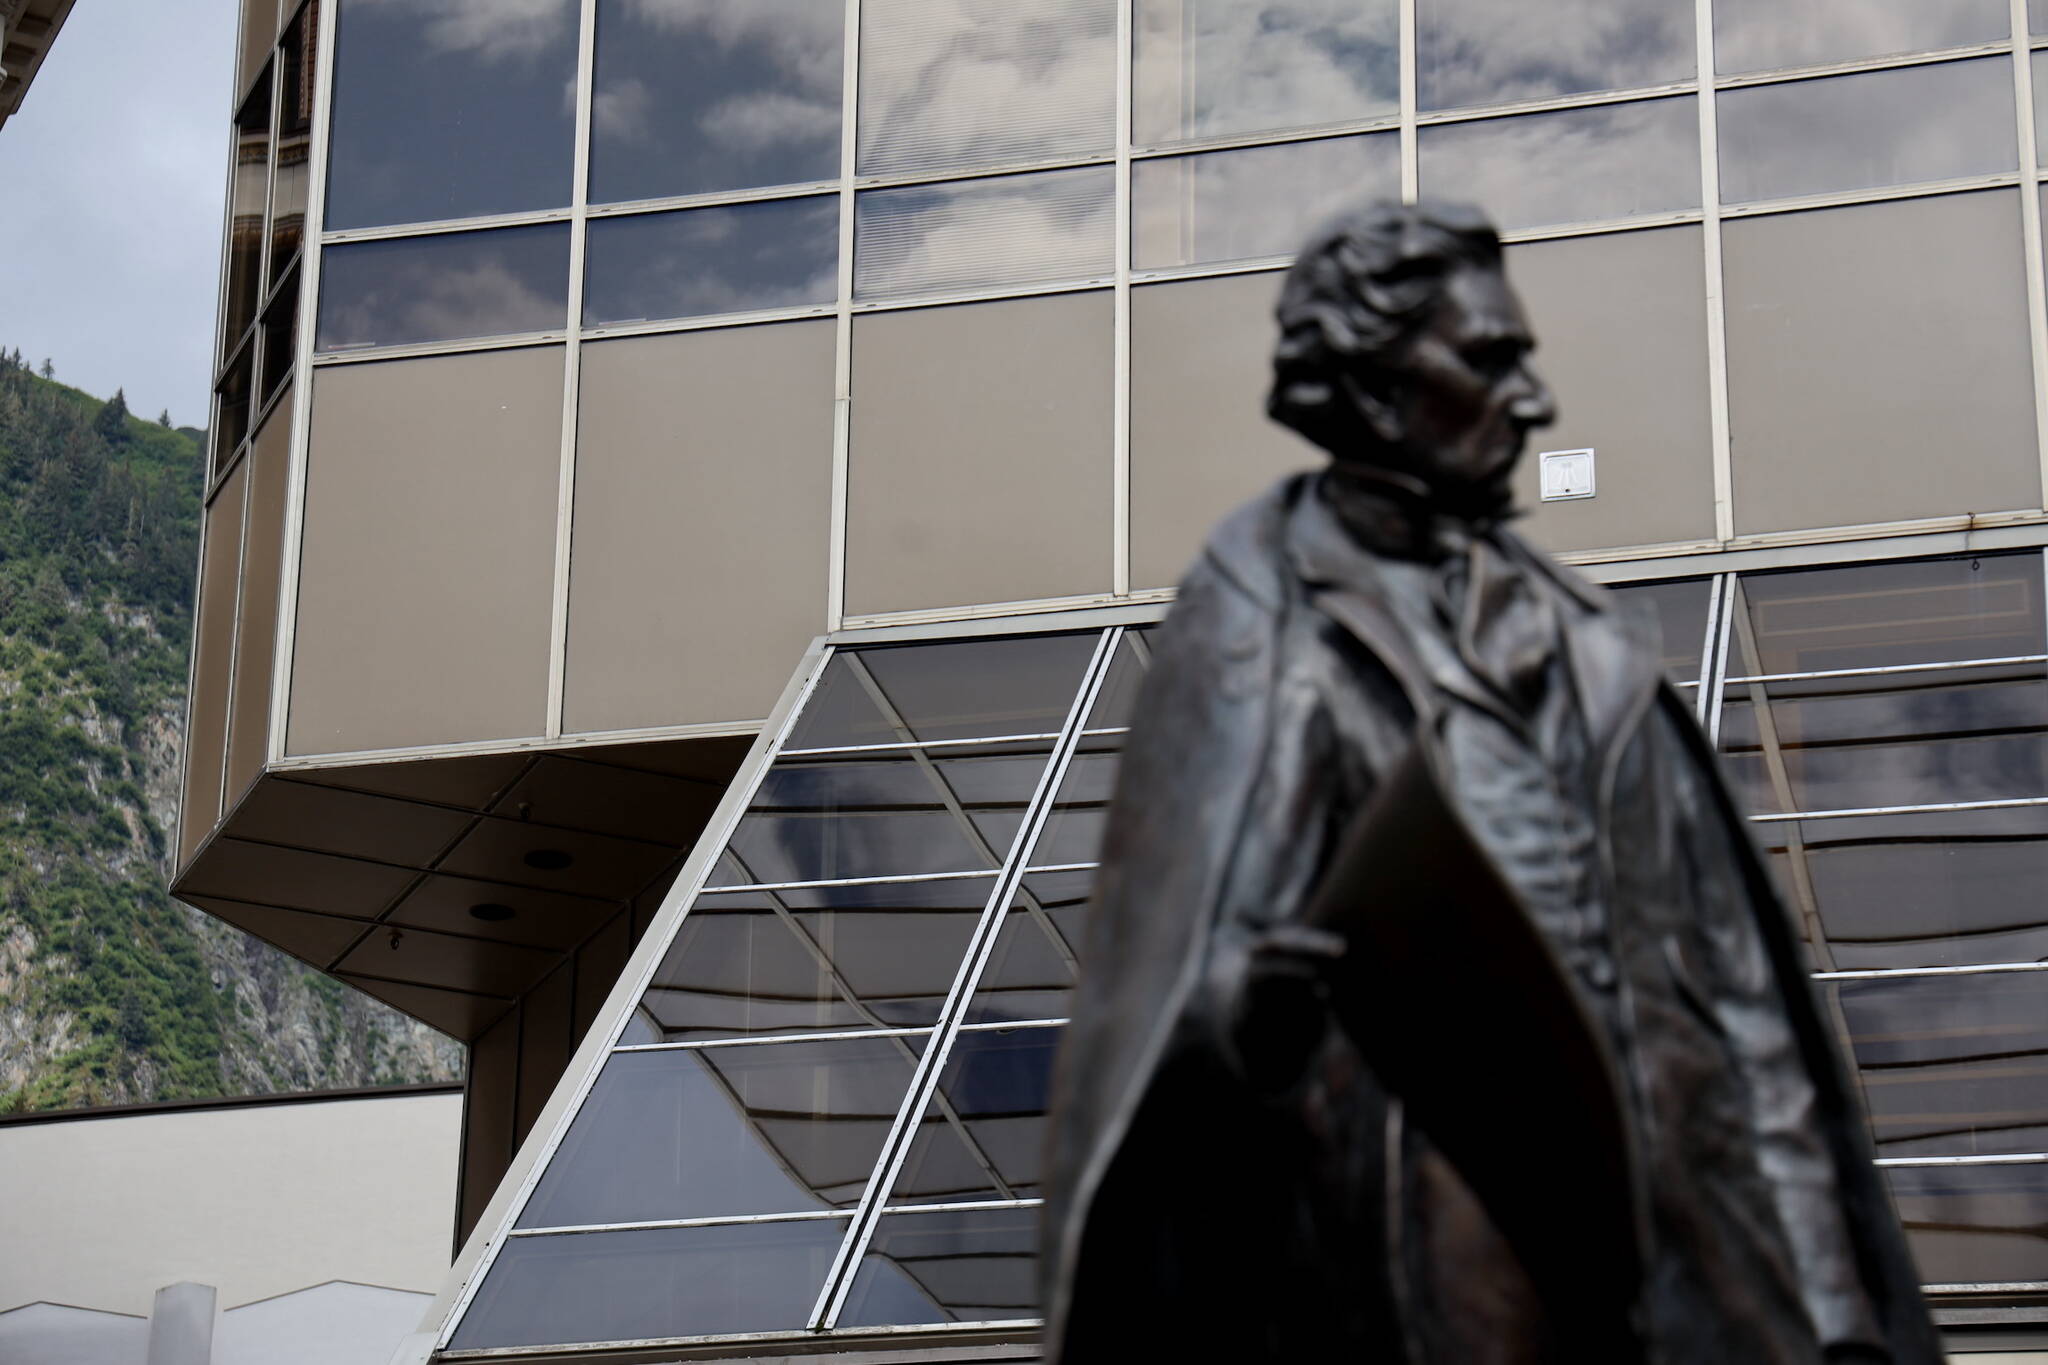 A statue of William Henry Seward stands outside the Dimond Courthouse in downtown Juneau. The family of a Juneau man who died after suffering a blunt-force neck injury filed a wrongful death lawsuit against Carver Construction LLC, arguing it breached its duty to ensure the family’s residence was reasonably safe amid ongoing renovations. (Clarise Larson / Juneau Empire File)